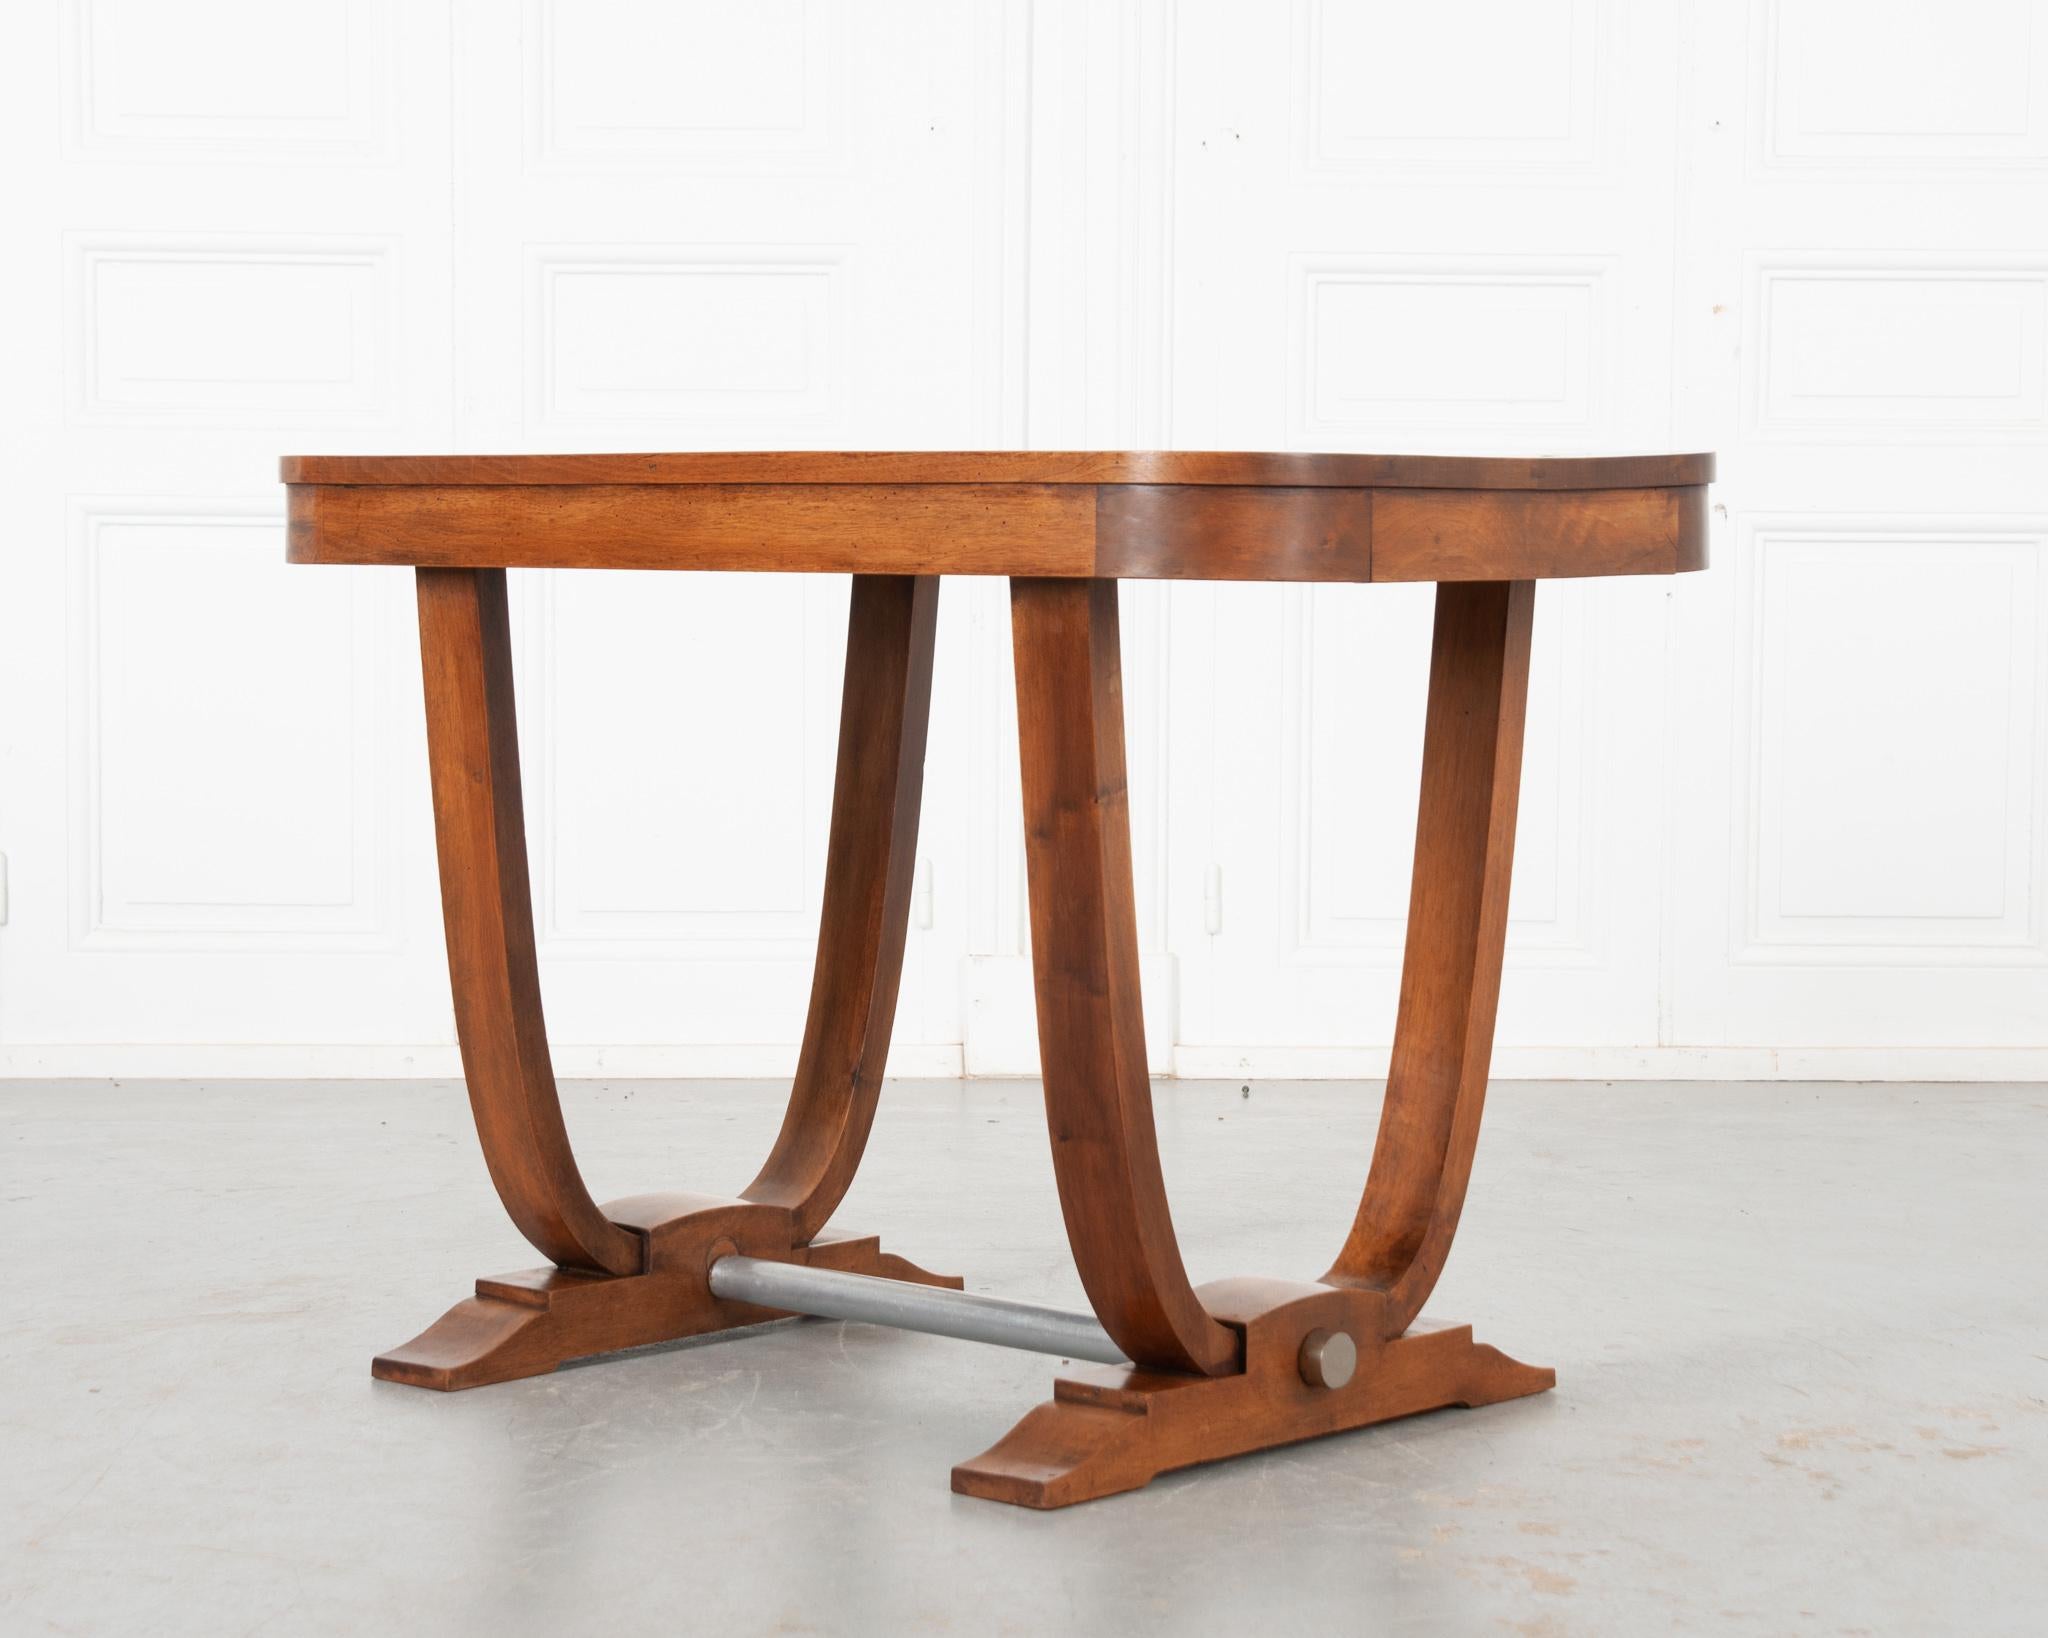 A handsome Art Deco table from France! Made of vibrant walnut that's been recently polished with French wax paste. Elegant curved edges around the top and legs give it a classic Art Deco design. Stepped feet, attached with a cylindrical metal